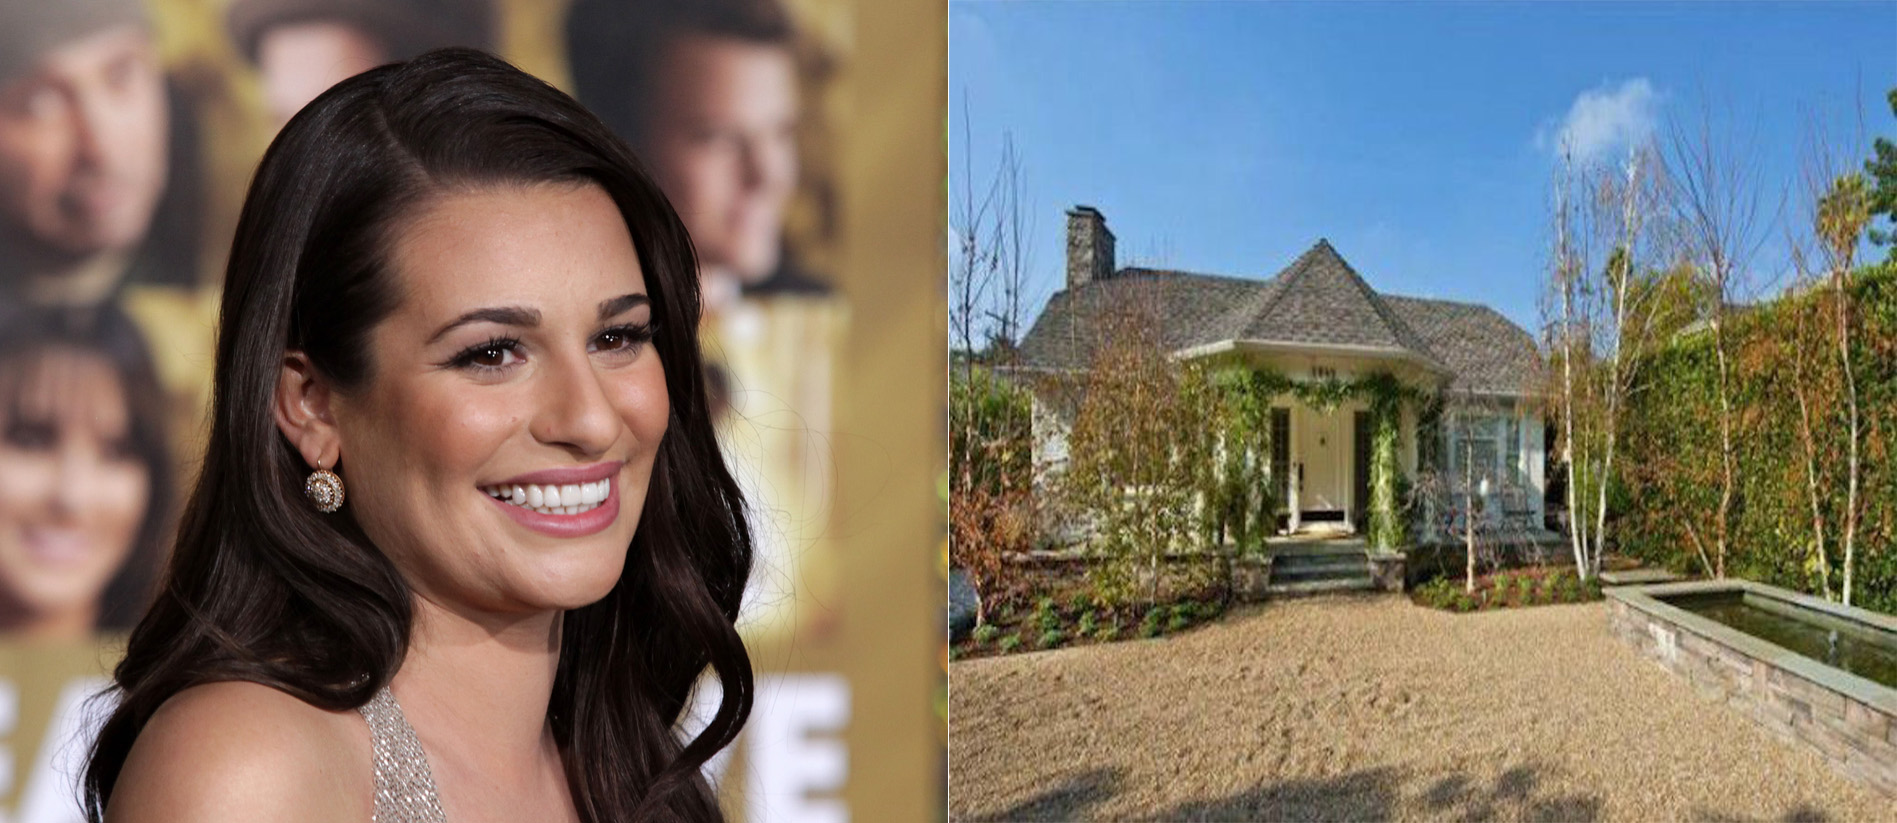 Lea Michele Celebrities Who Live in Modest Homes